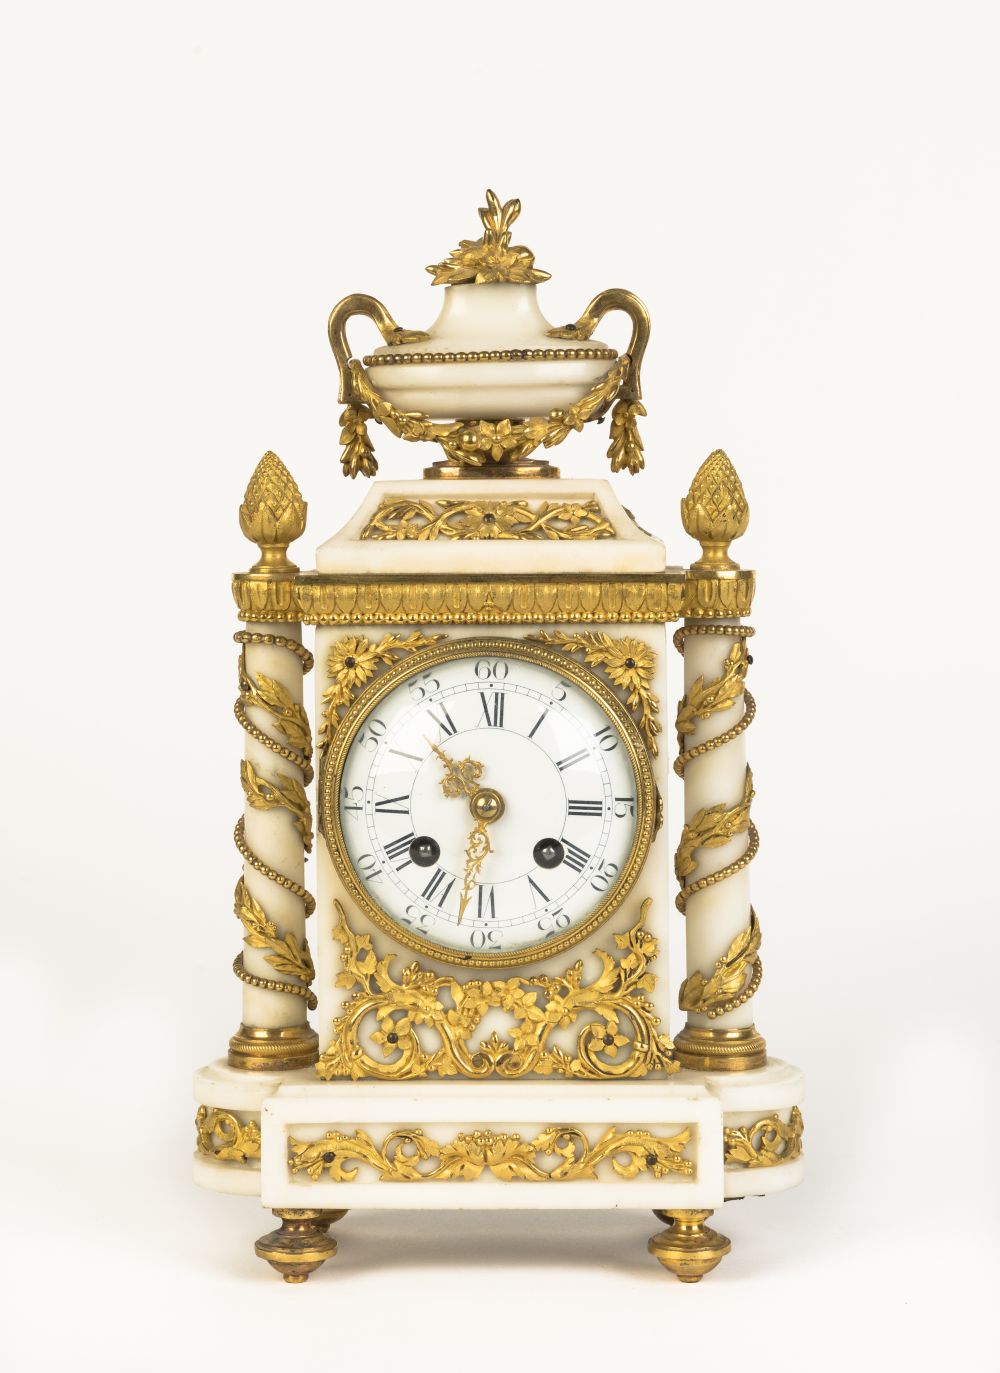 A LOUIS XVI STYLE ORMOLU-MOUNTED WHITE MARBLE MANTLE CLOCK Early 20th century